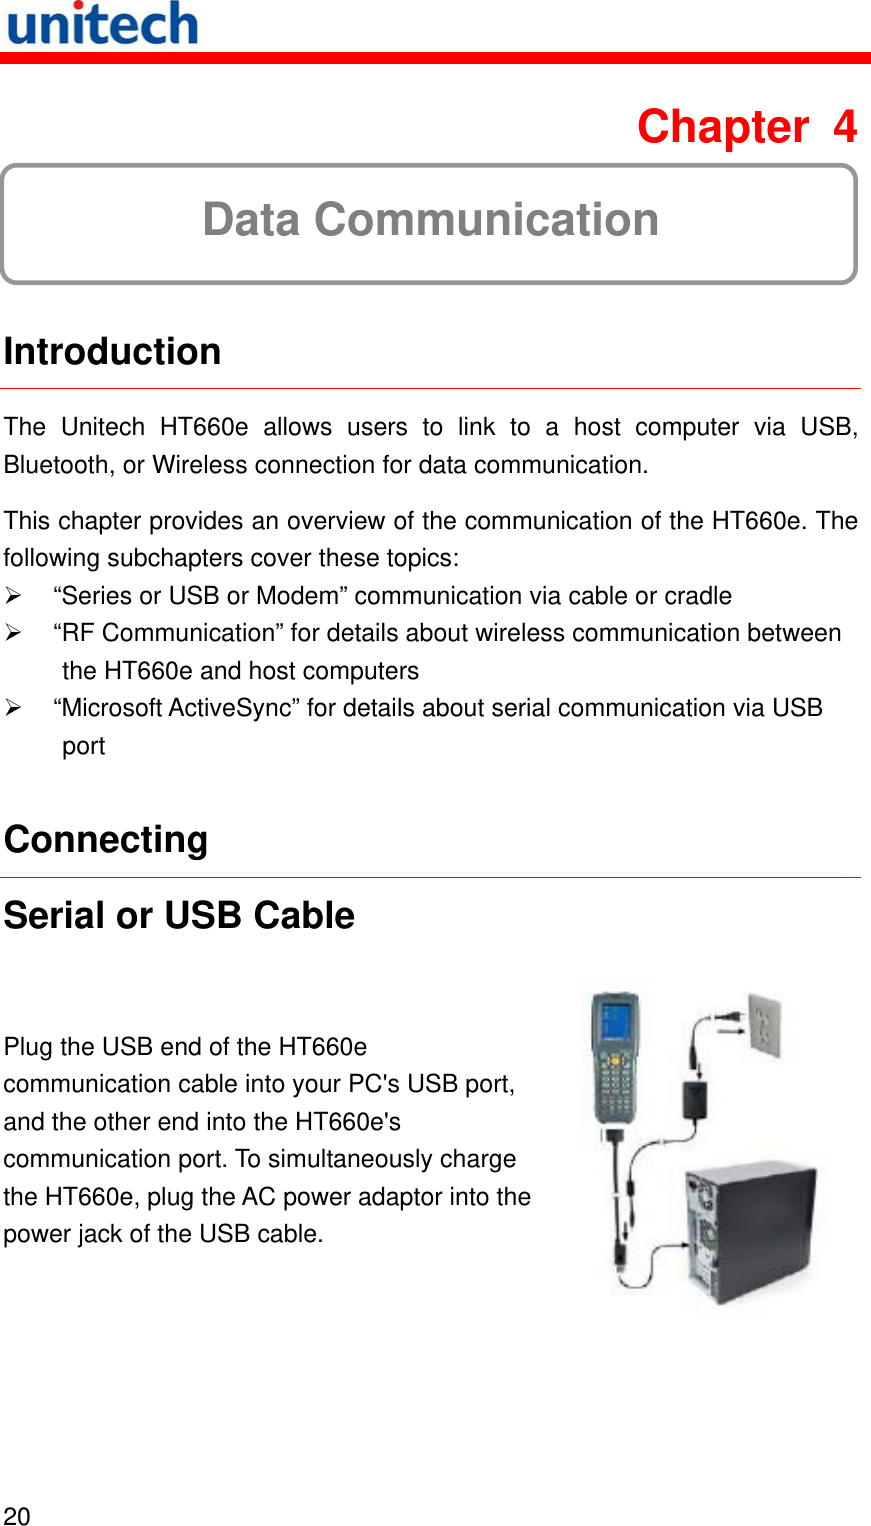   20  Chapter 4  Data Communication  Introduction The Unitech HT660e allows users to link to a host computer via USB, Bluetooth, or Wireless connection for data communication. This chapter provides an overview of the communication of the HT660e. The following subchapters cover these topics:   “Series or USB or Modem” communication via cable or cradle   “RF Communication” for details about wireless communication between the HT660e and host computers   “Microsoft ActiveSync” for details about serial communication via USB port Connecting Serial or USB Cable Plug the USB end of the HT660e communication cable into your PC&apos;s USB port, and the other end into the HT660e&apos;s communication port. To simultaneously charge the HT660e, plug the AC power adaptor into the power jack of the USB cable.  